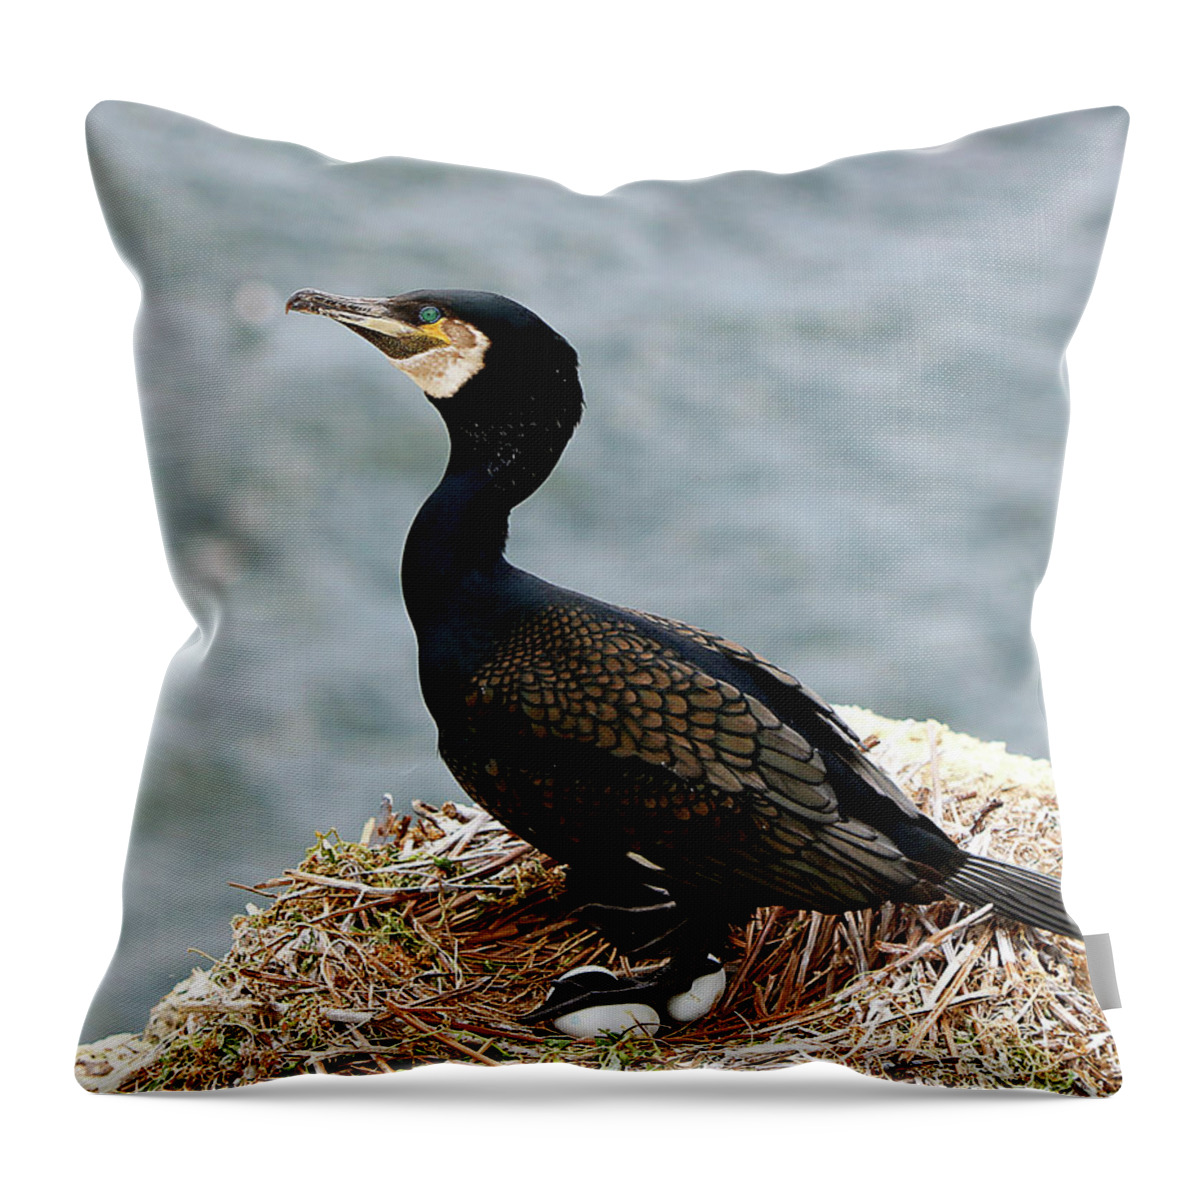  Throw Pillow featuring the photograph Ireland 22 by Eric Pengelly